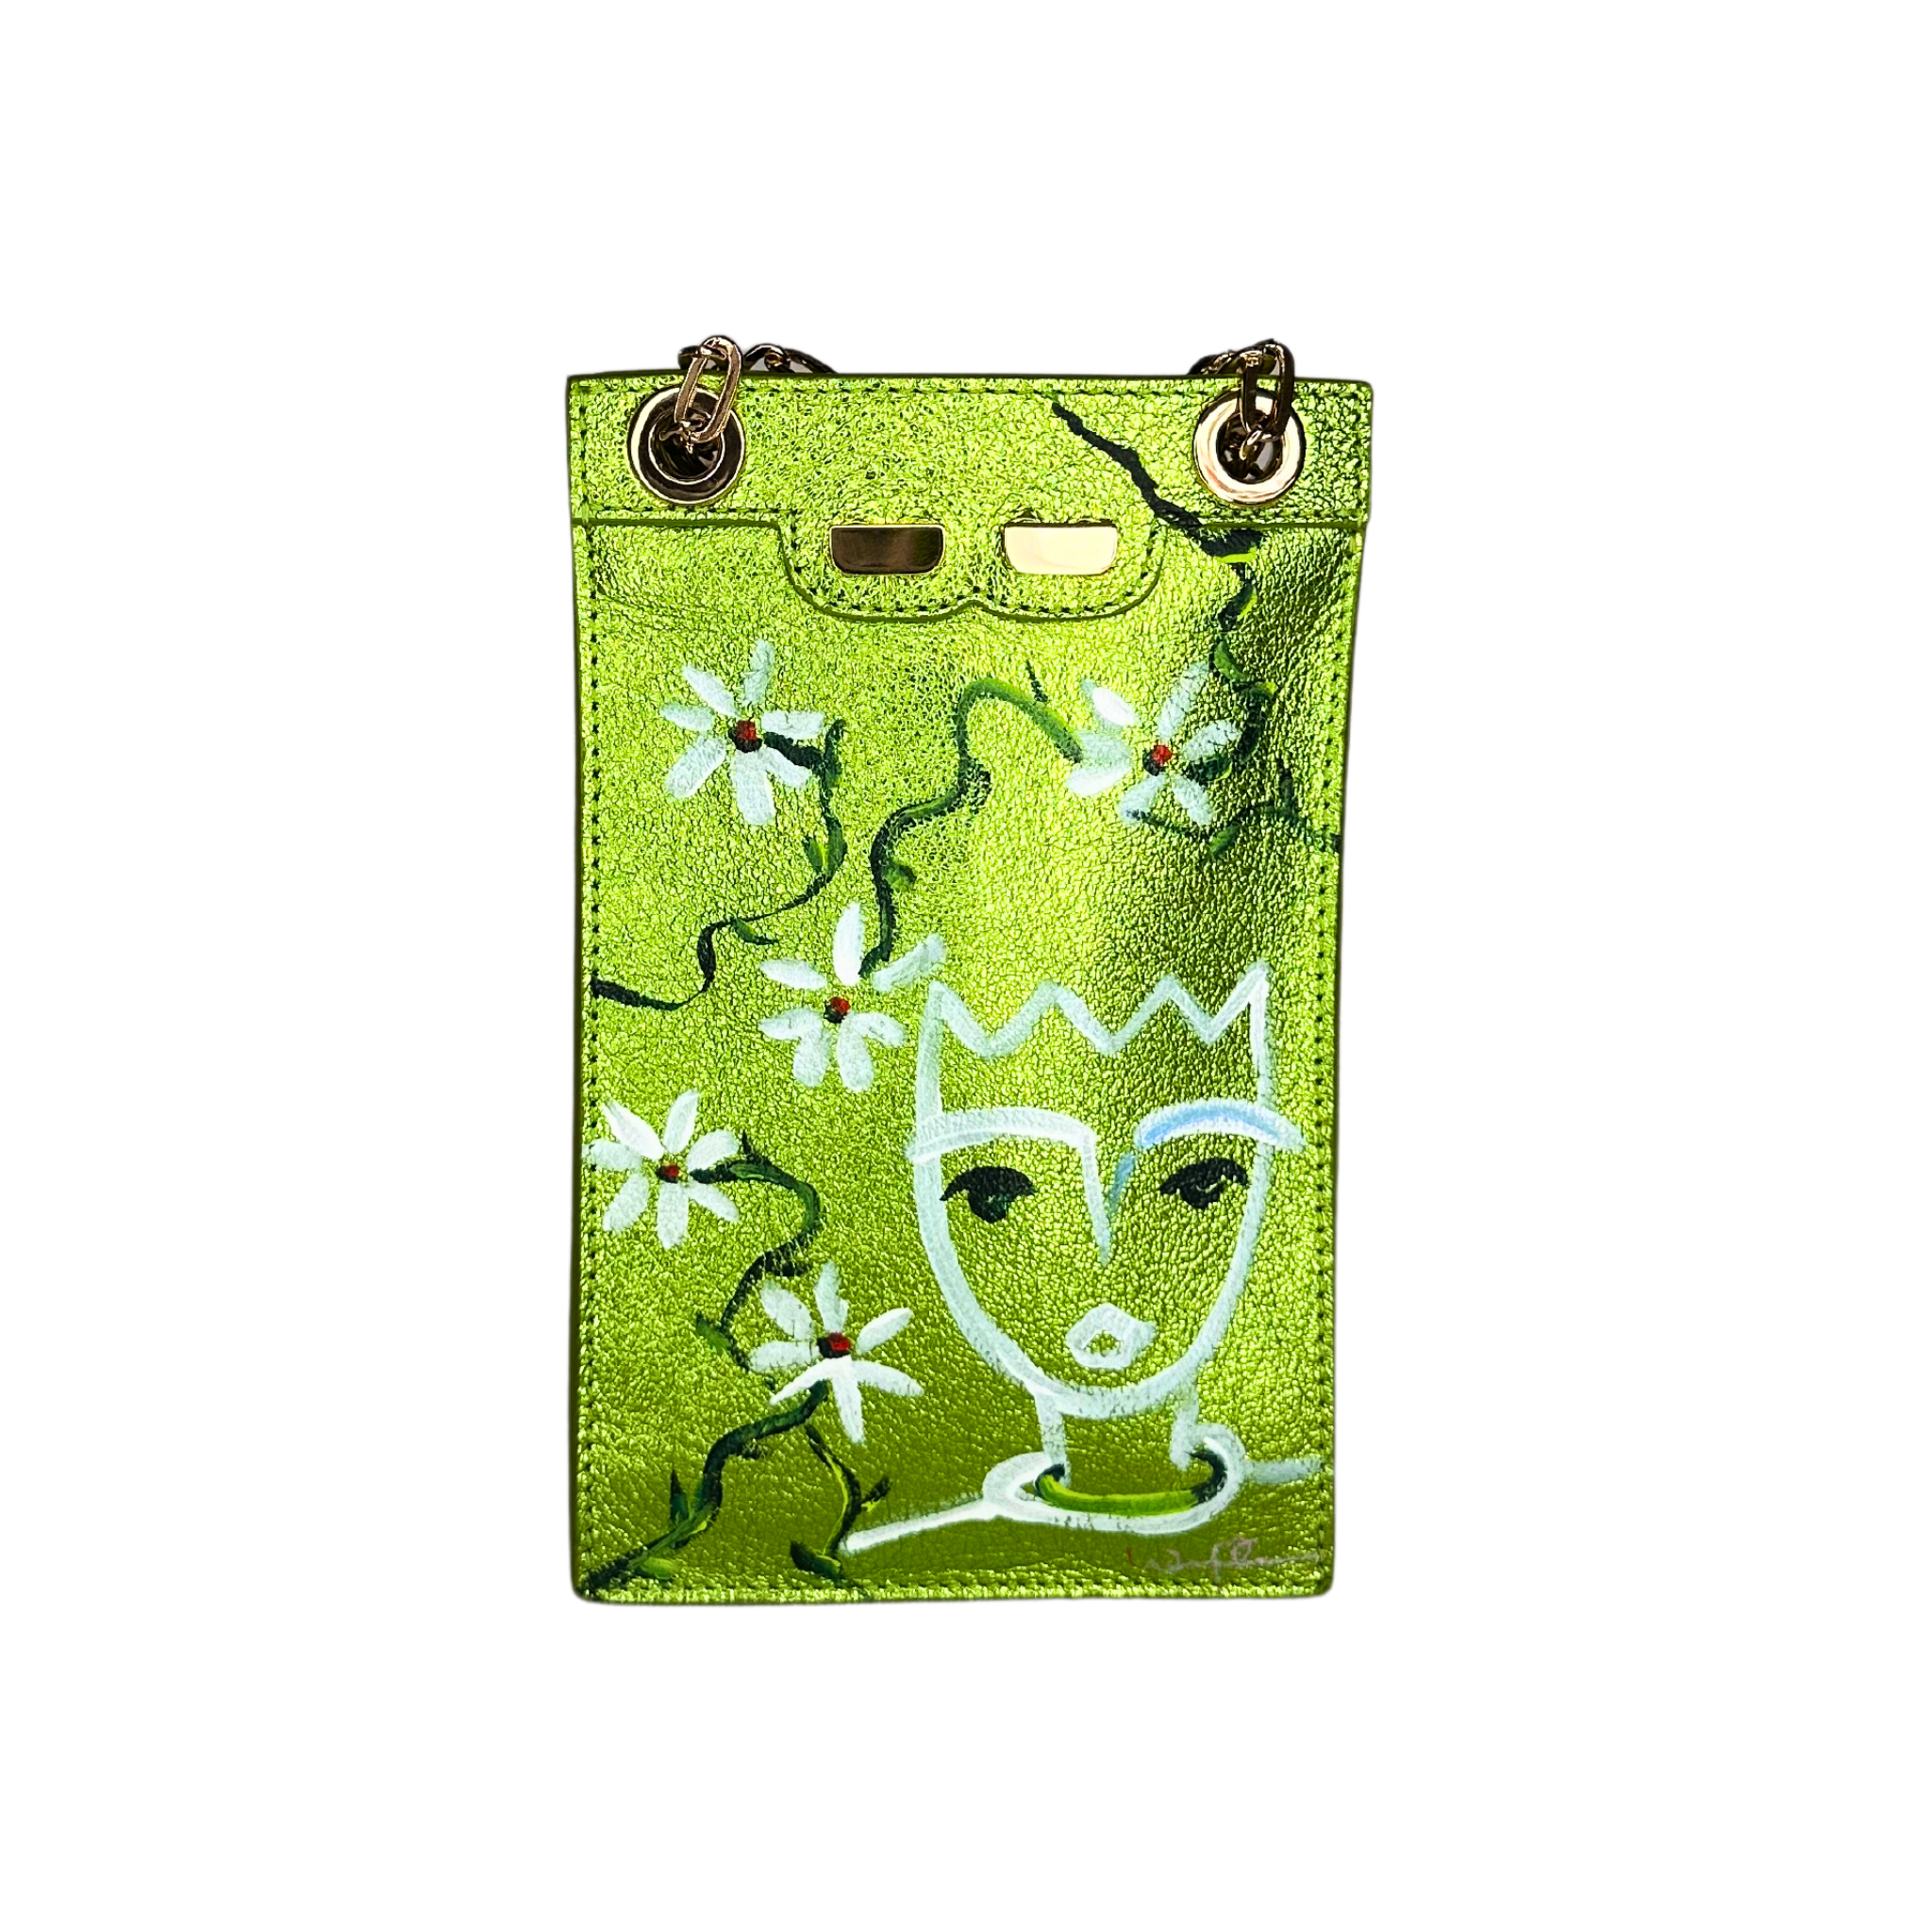 Catherine Cellphone Pouch in Metallic Lime